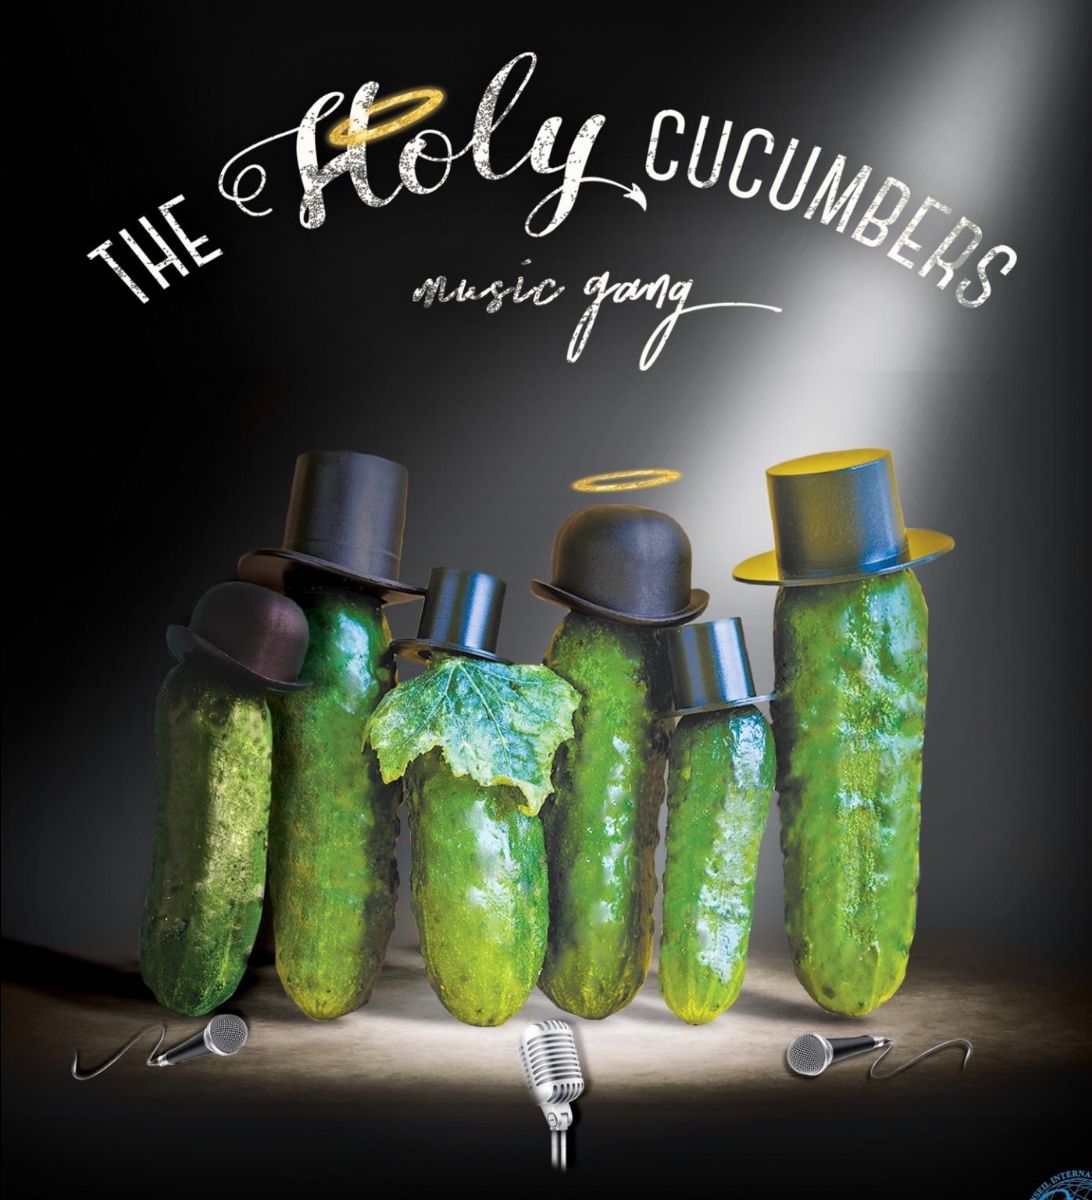 THE HOLY CUCUMBERS MUSIC GANG